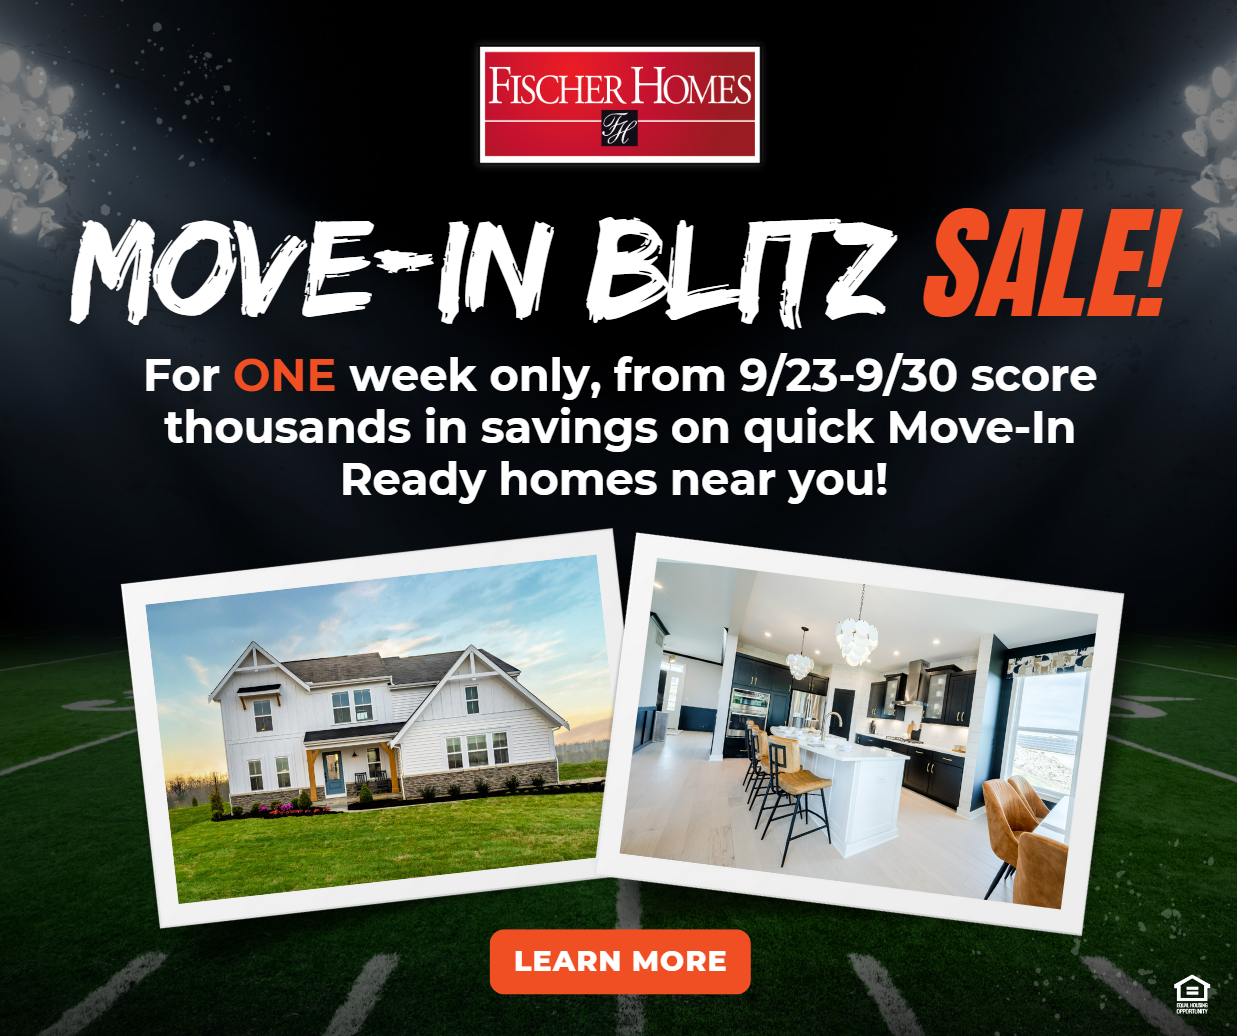 Score Big Savings During the Fischer Homes Move-In Blitz!